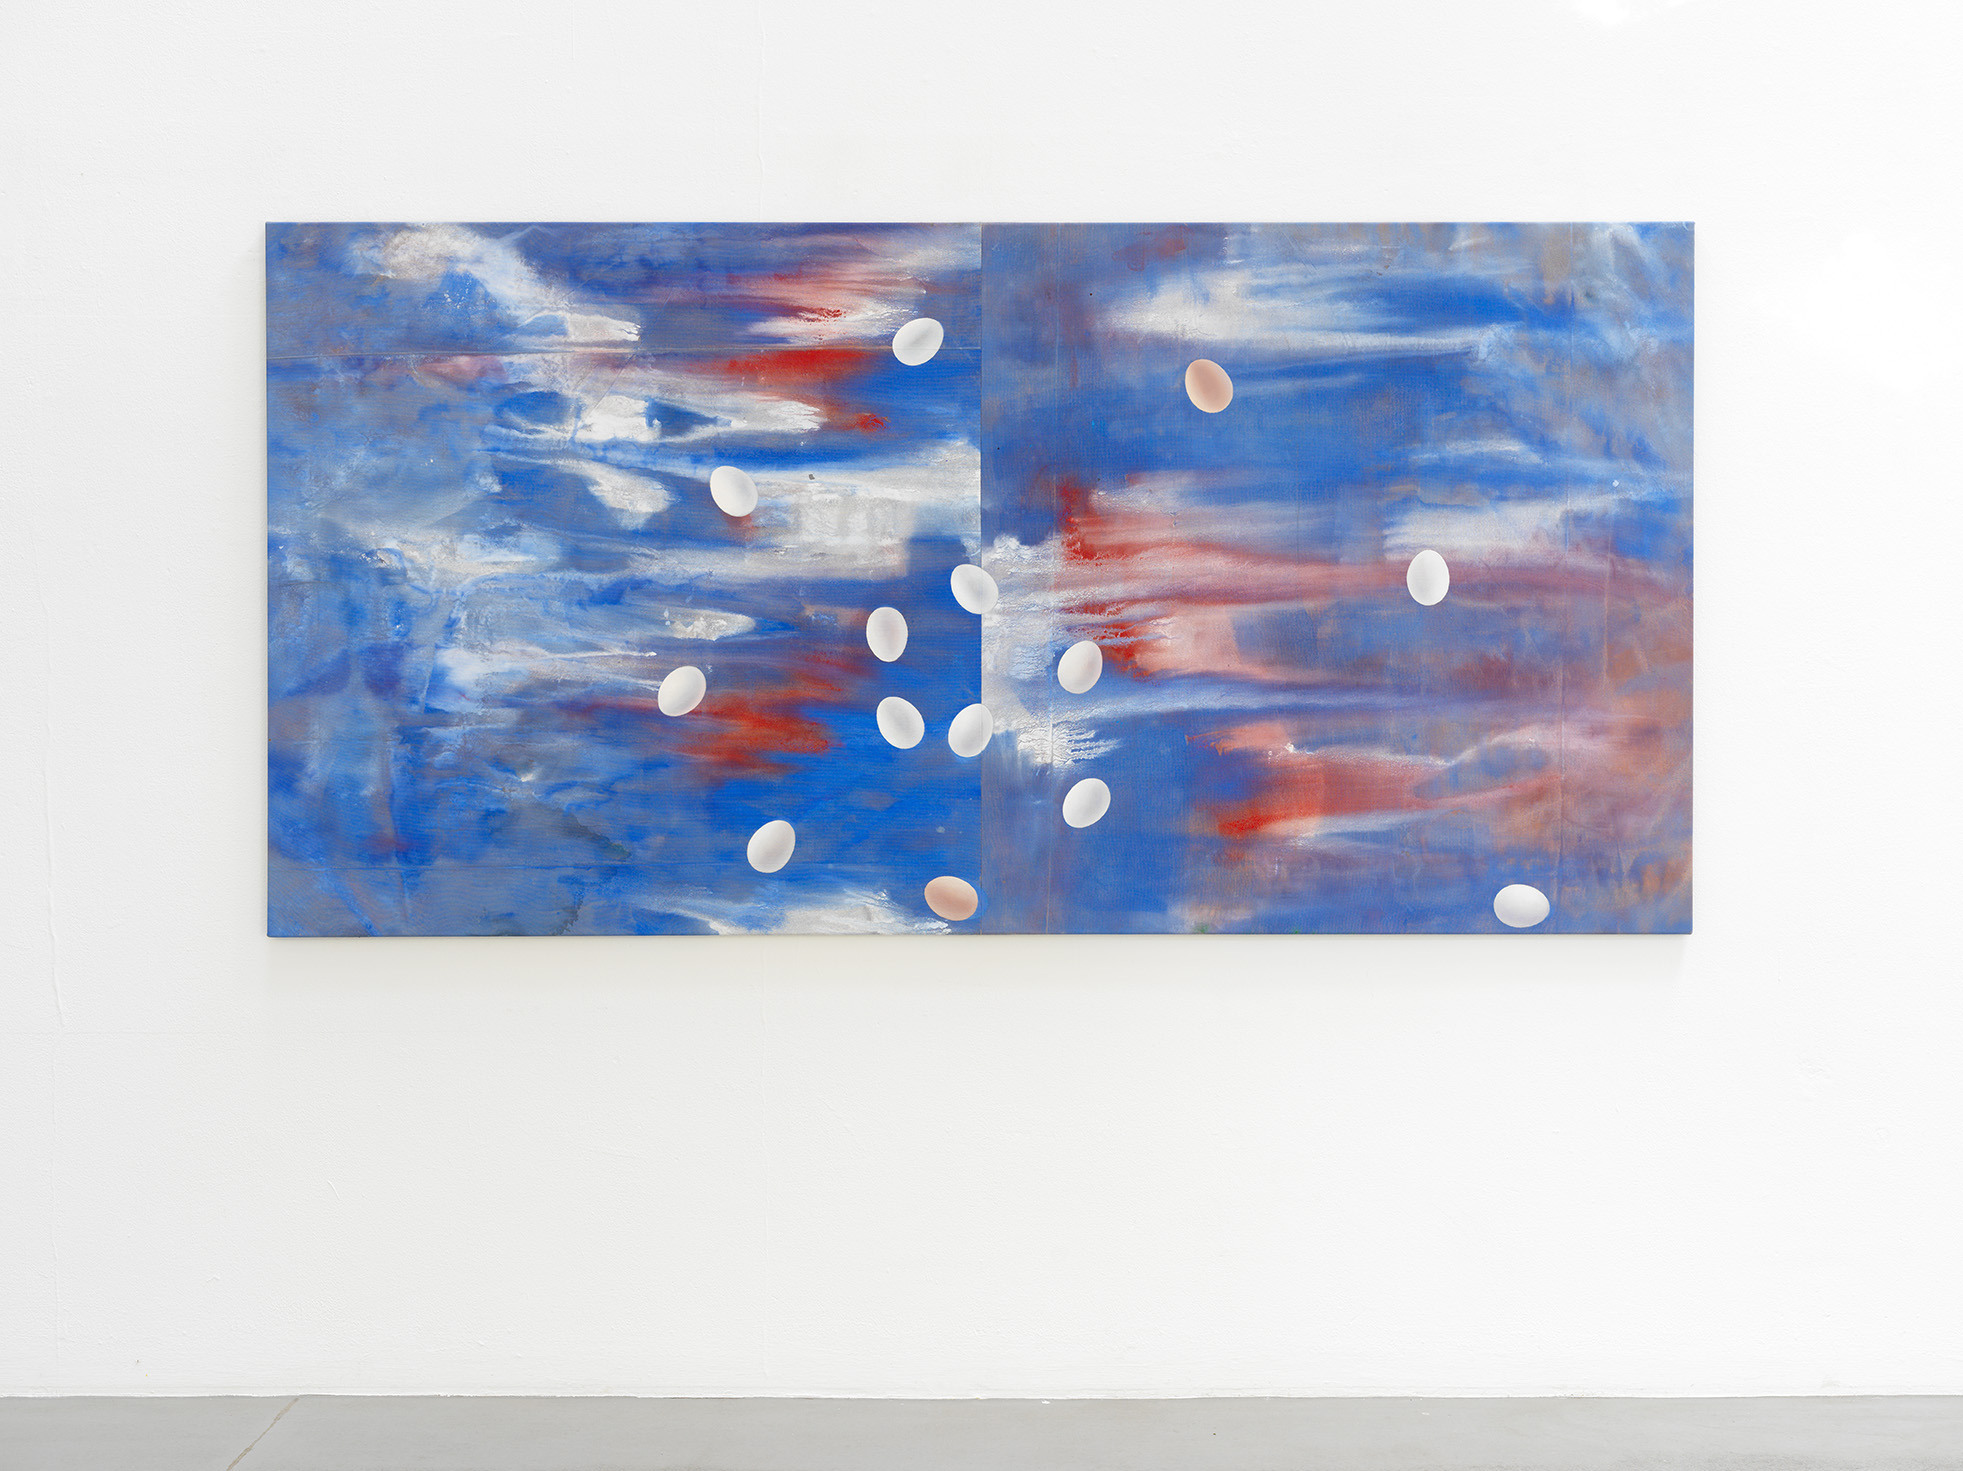 Katharina Schilling, Send in the Clowns (One at a Time), 2022, pigment and oil on canvas, 130 x 260 cm, Courtesy the artist, photo: Nick Ash